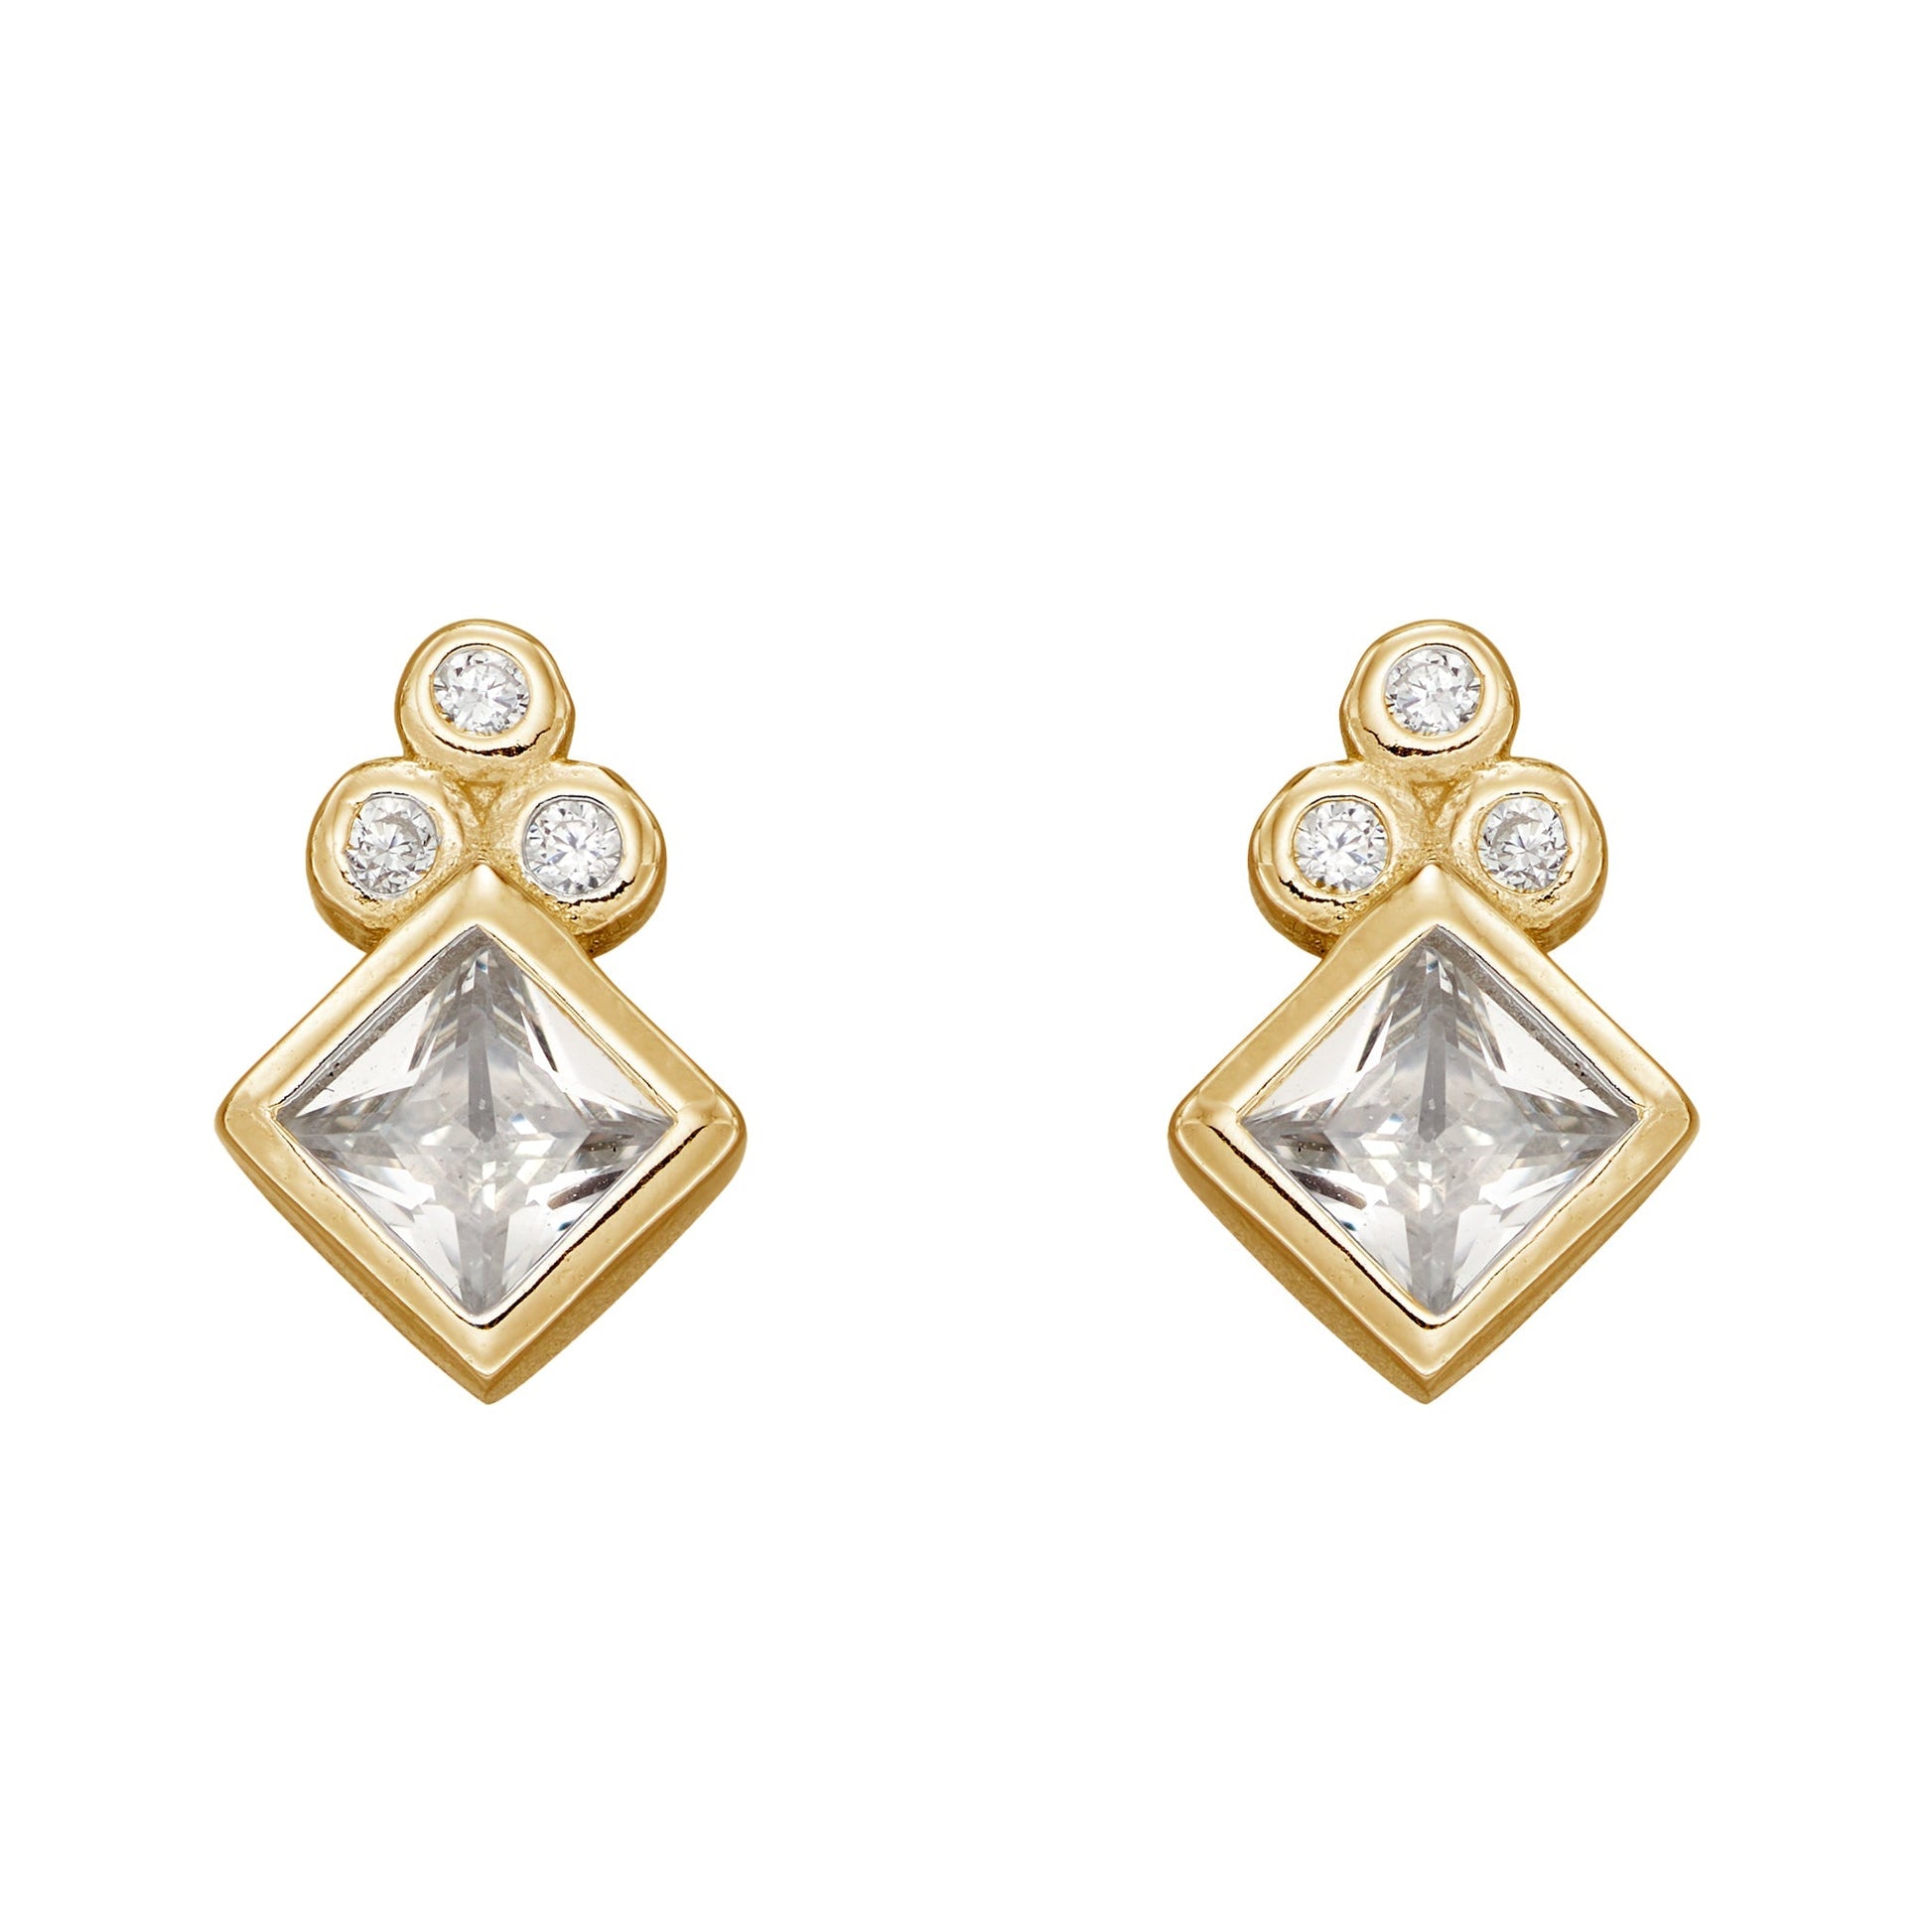 Sparkly cubic zirconia studs, gold plated on silver. - Collected